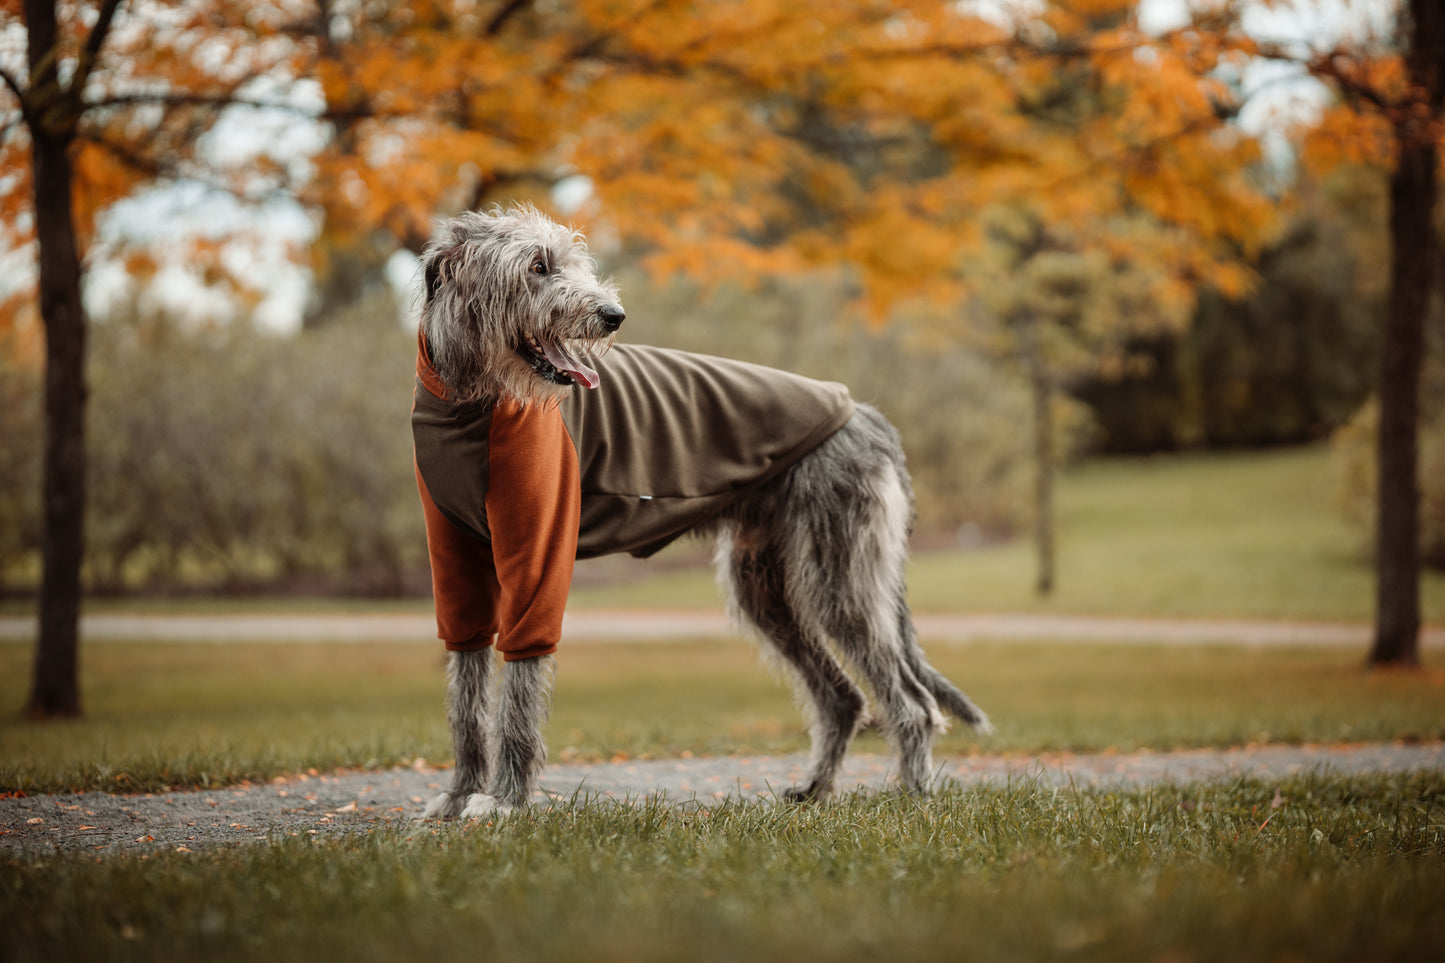 Made to measure sweater fleece for cats or dogs.